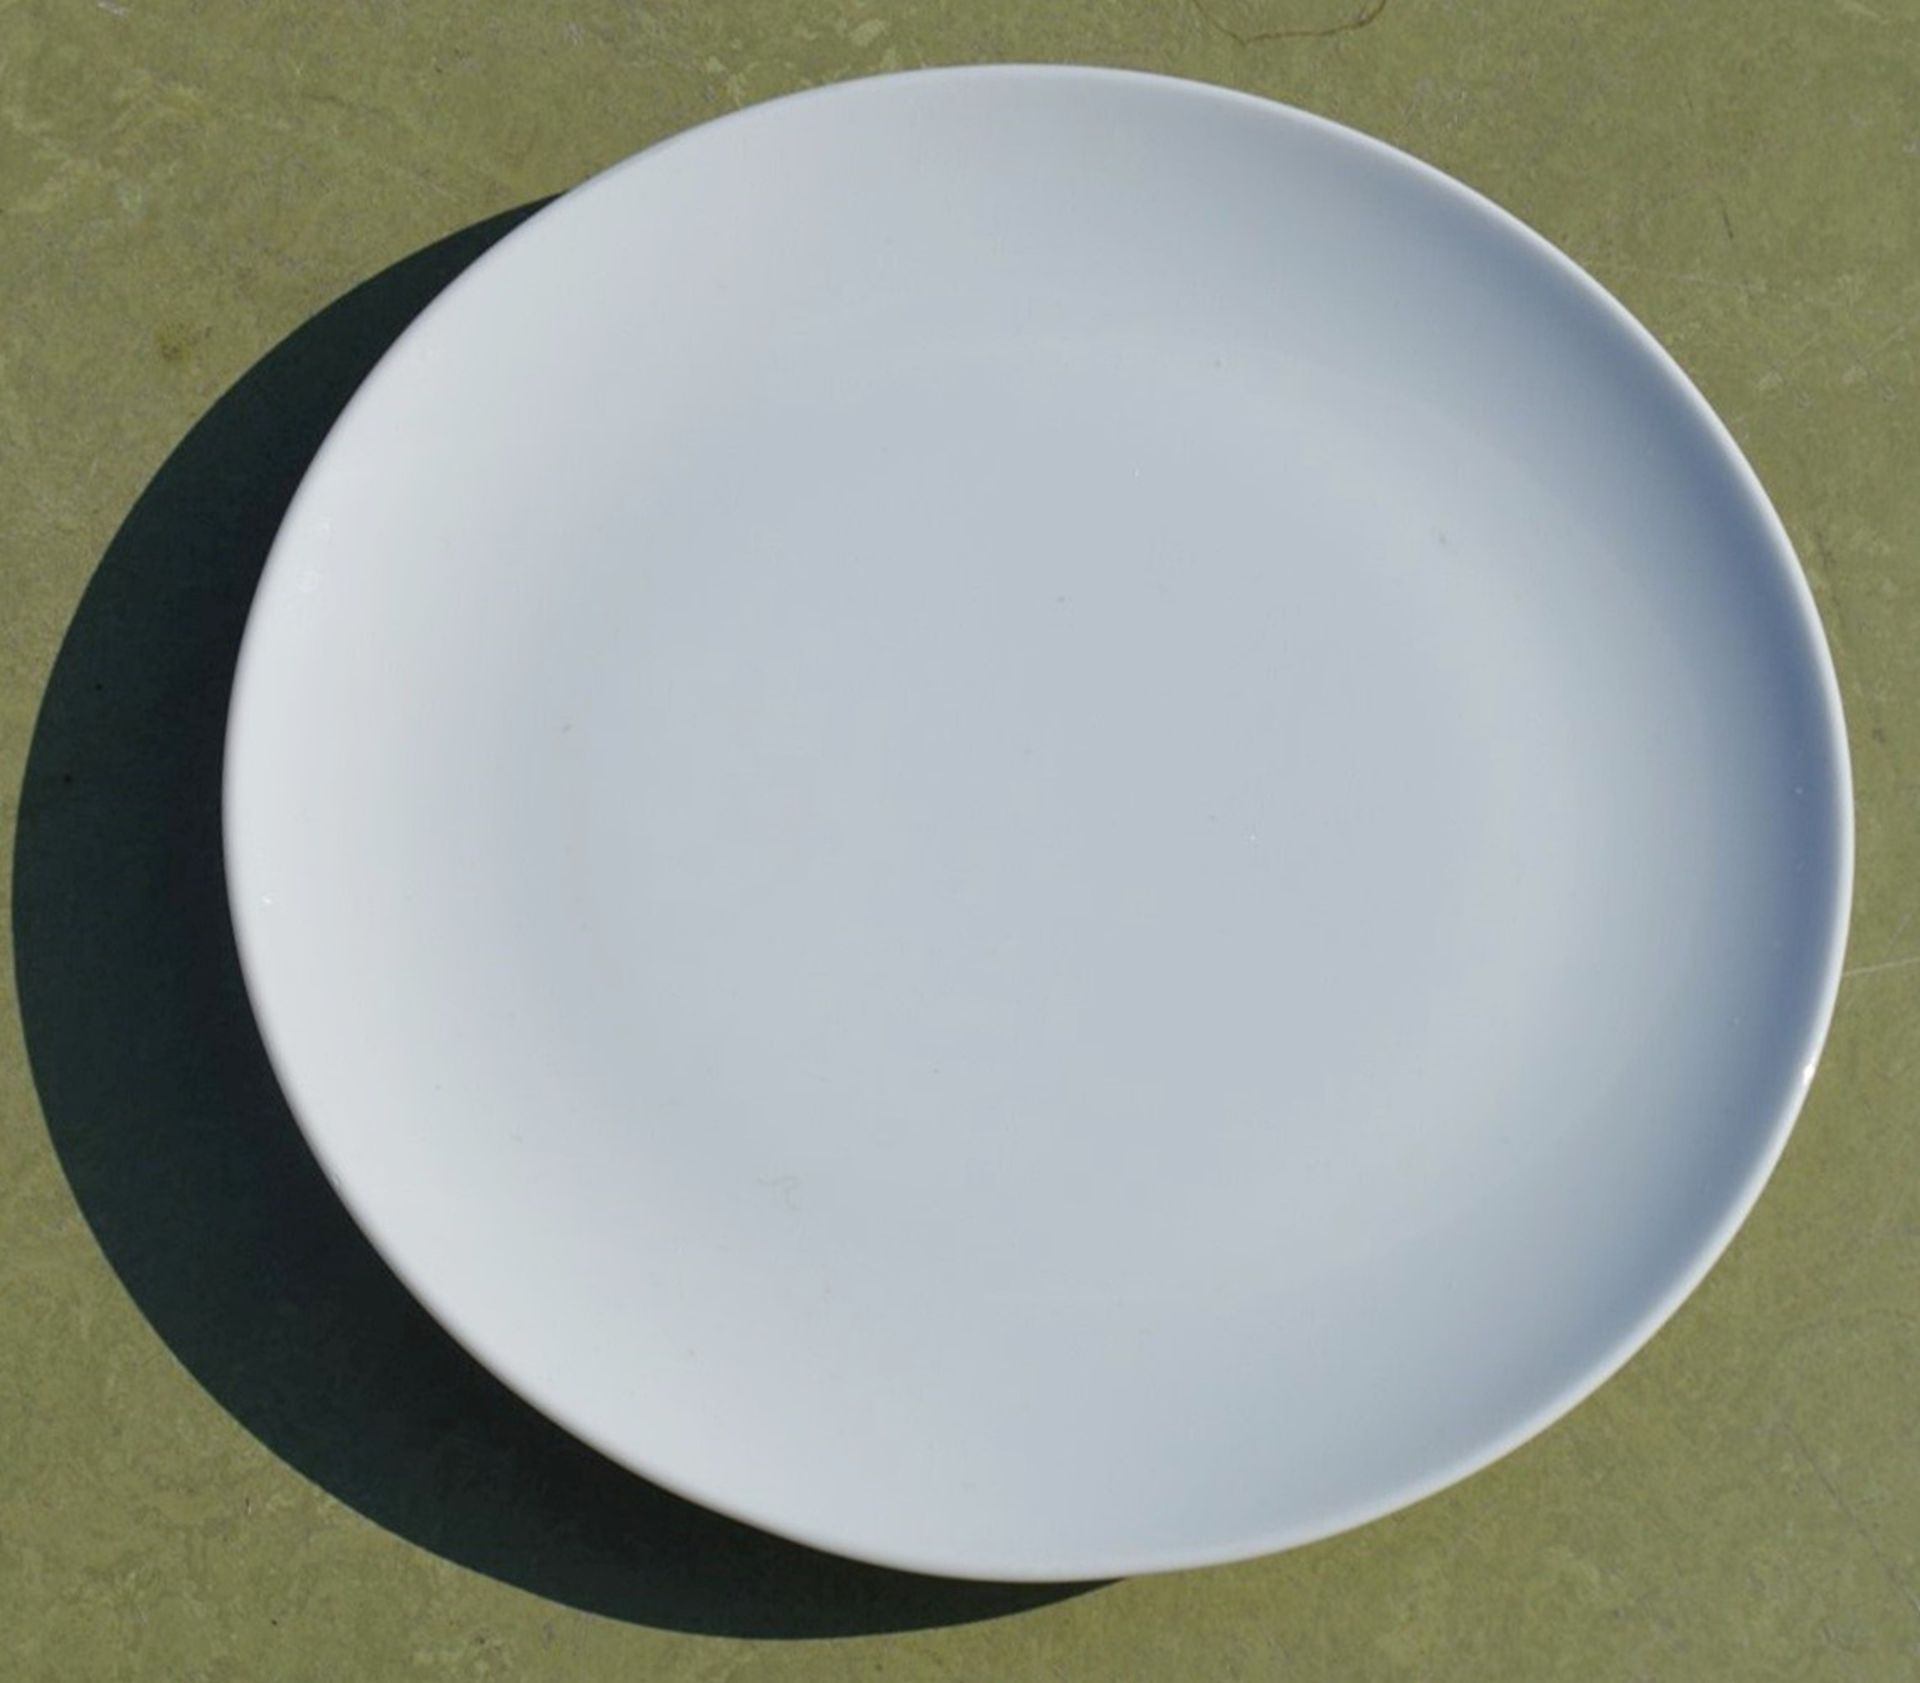 20 x PILLIVUYT Round 16cm Commercial Porcelain Bread / Cake Plates In White - Made In France -